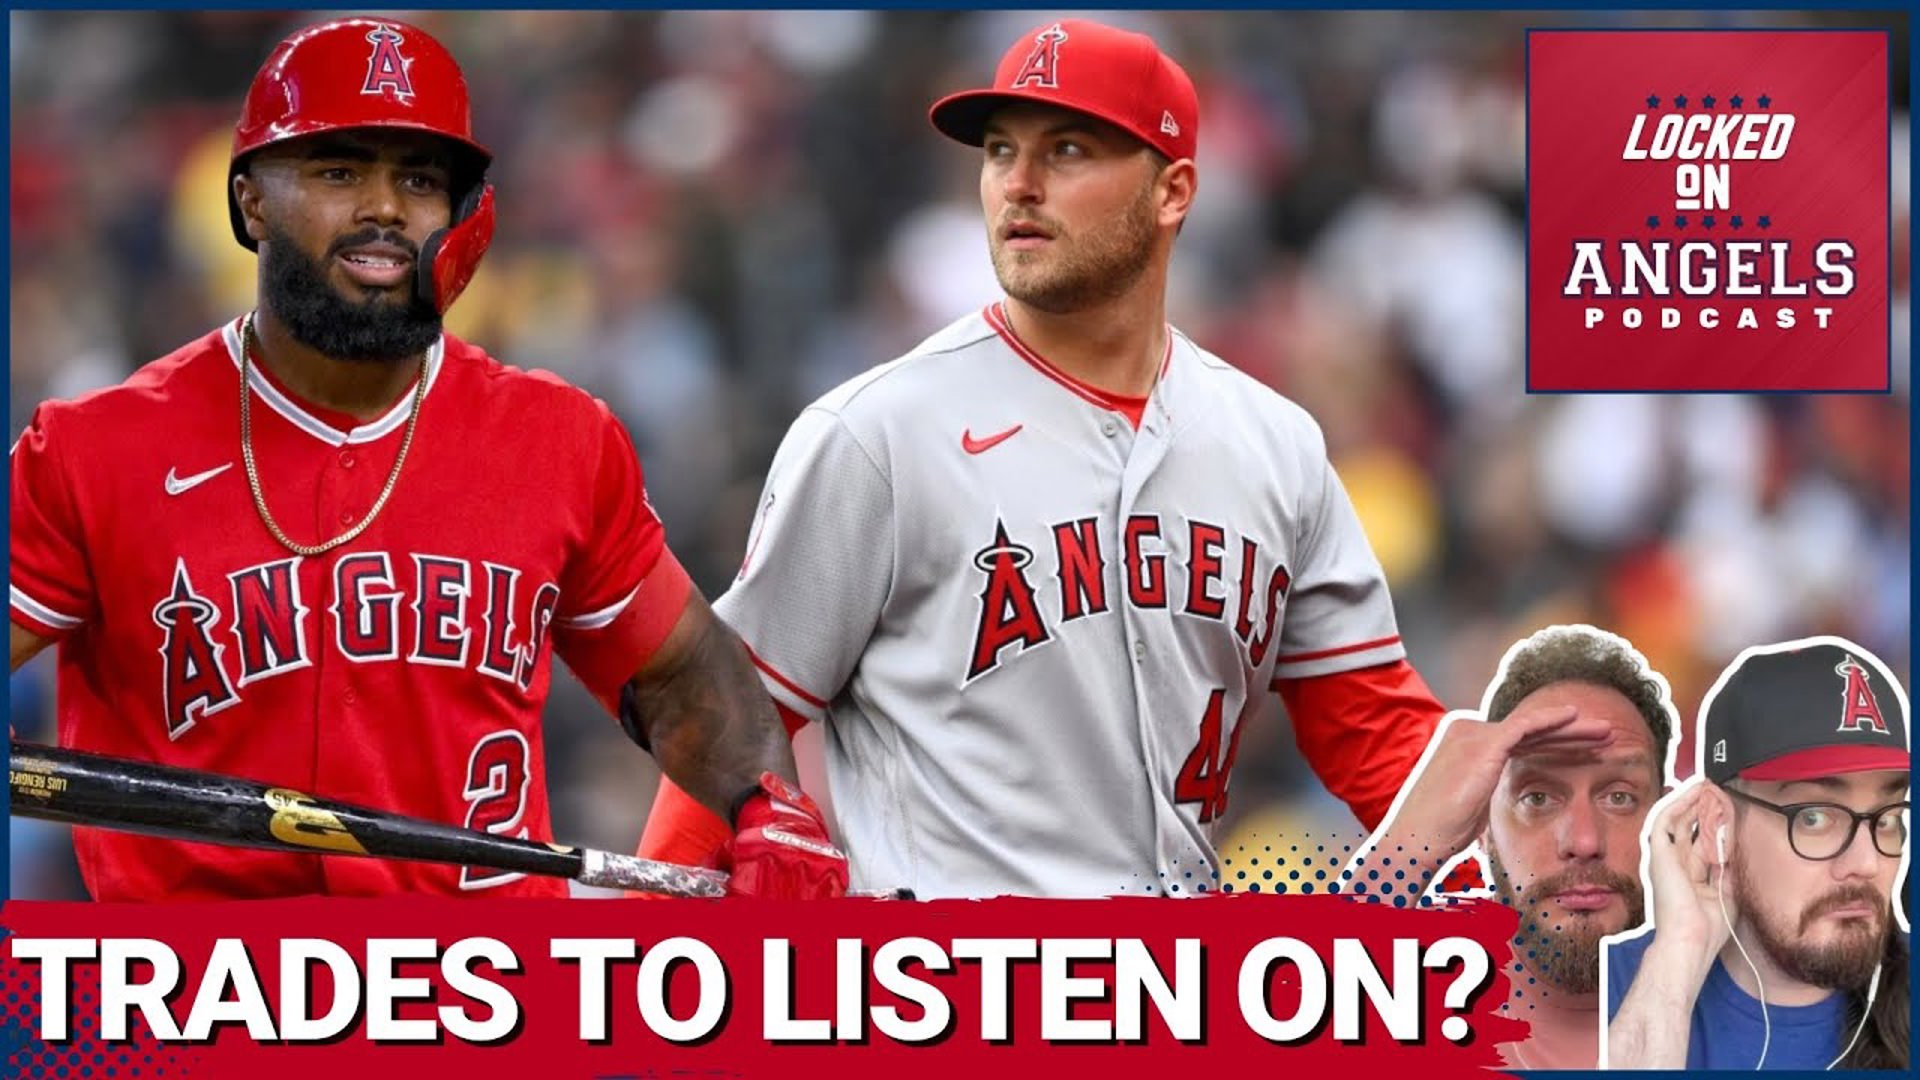 The Los Angeles Angels have a lot of trade capital come this year's trade deadline. So who should the Angels listen on, and who are the MUST trade candidates?